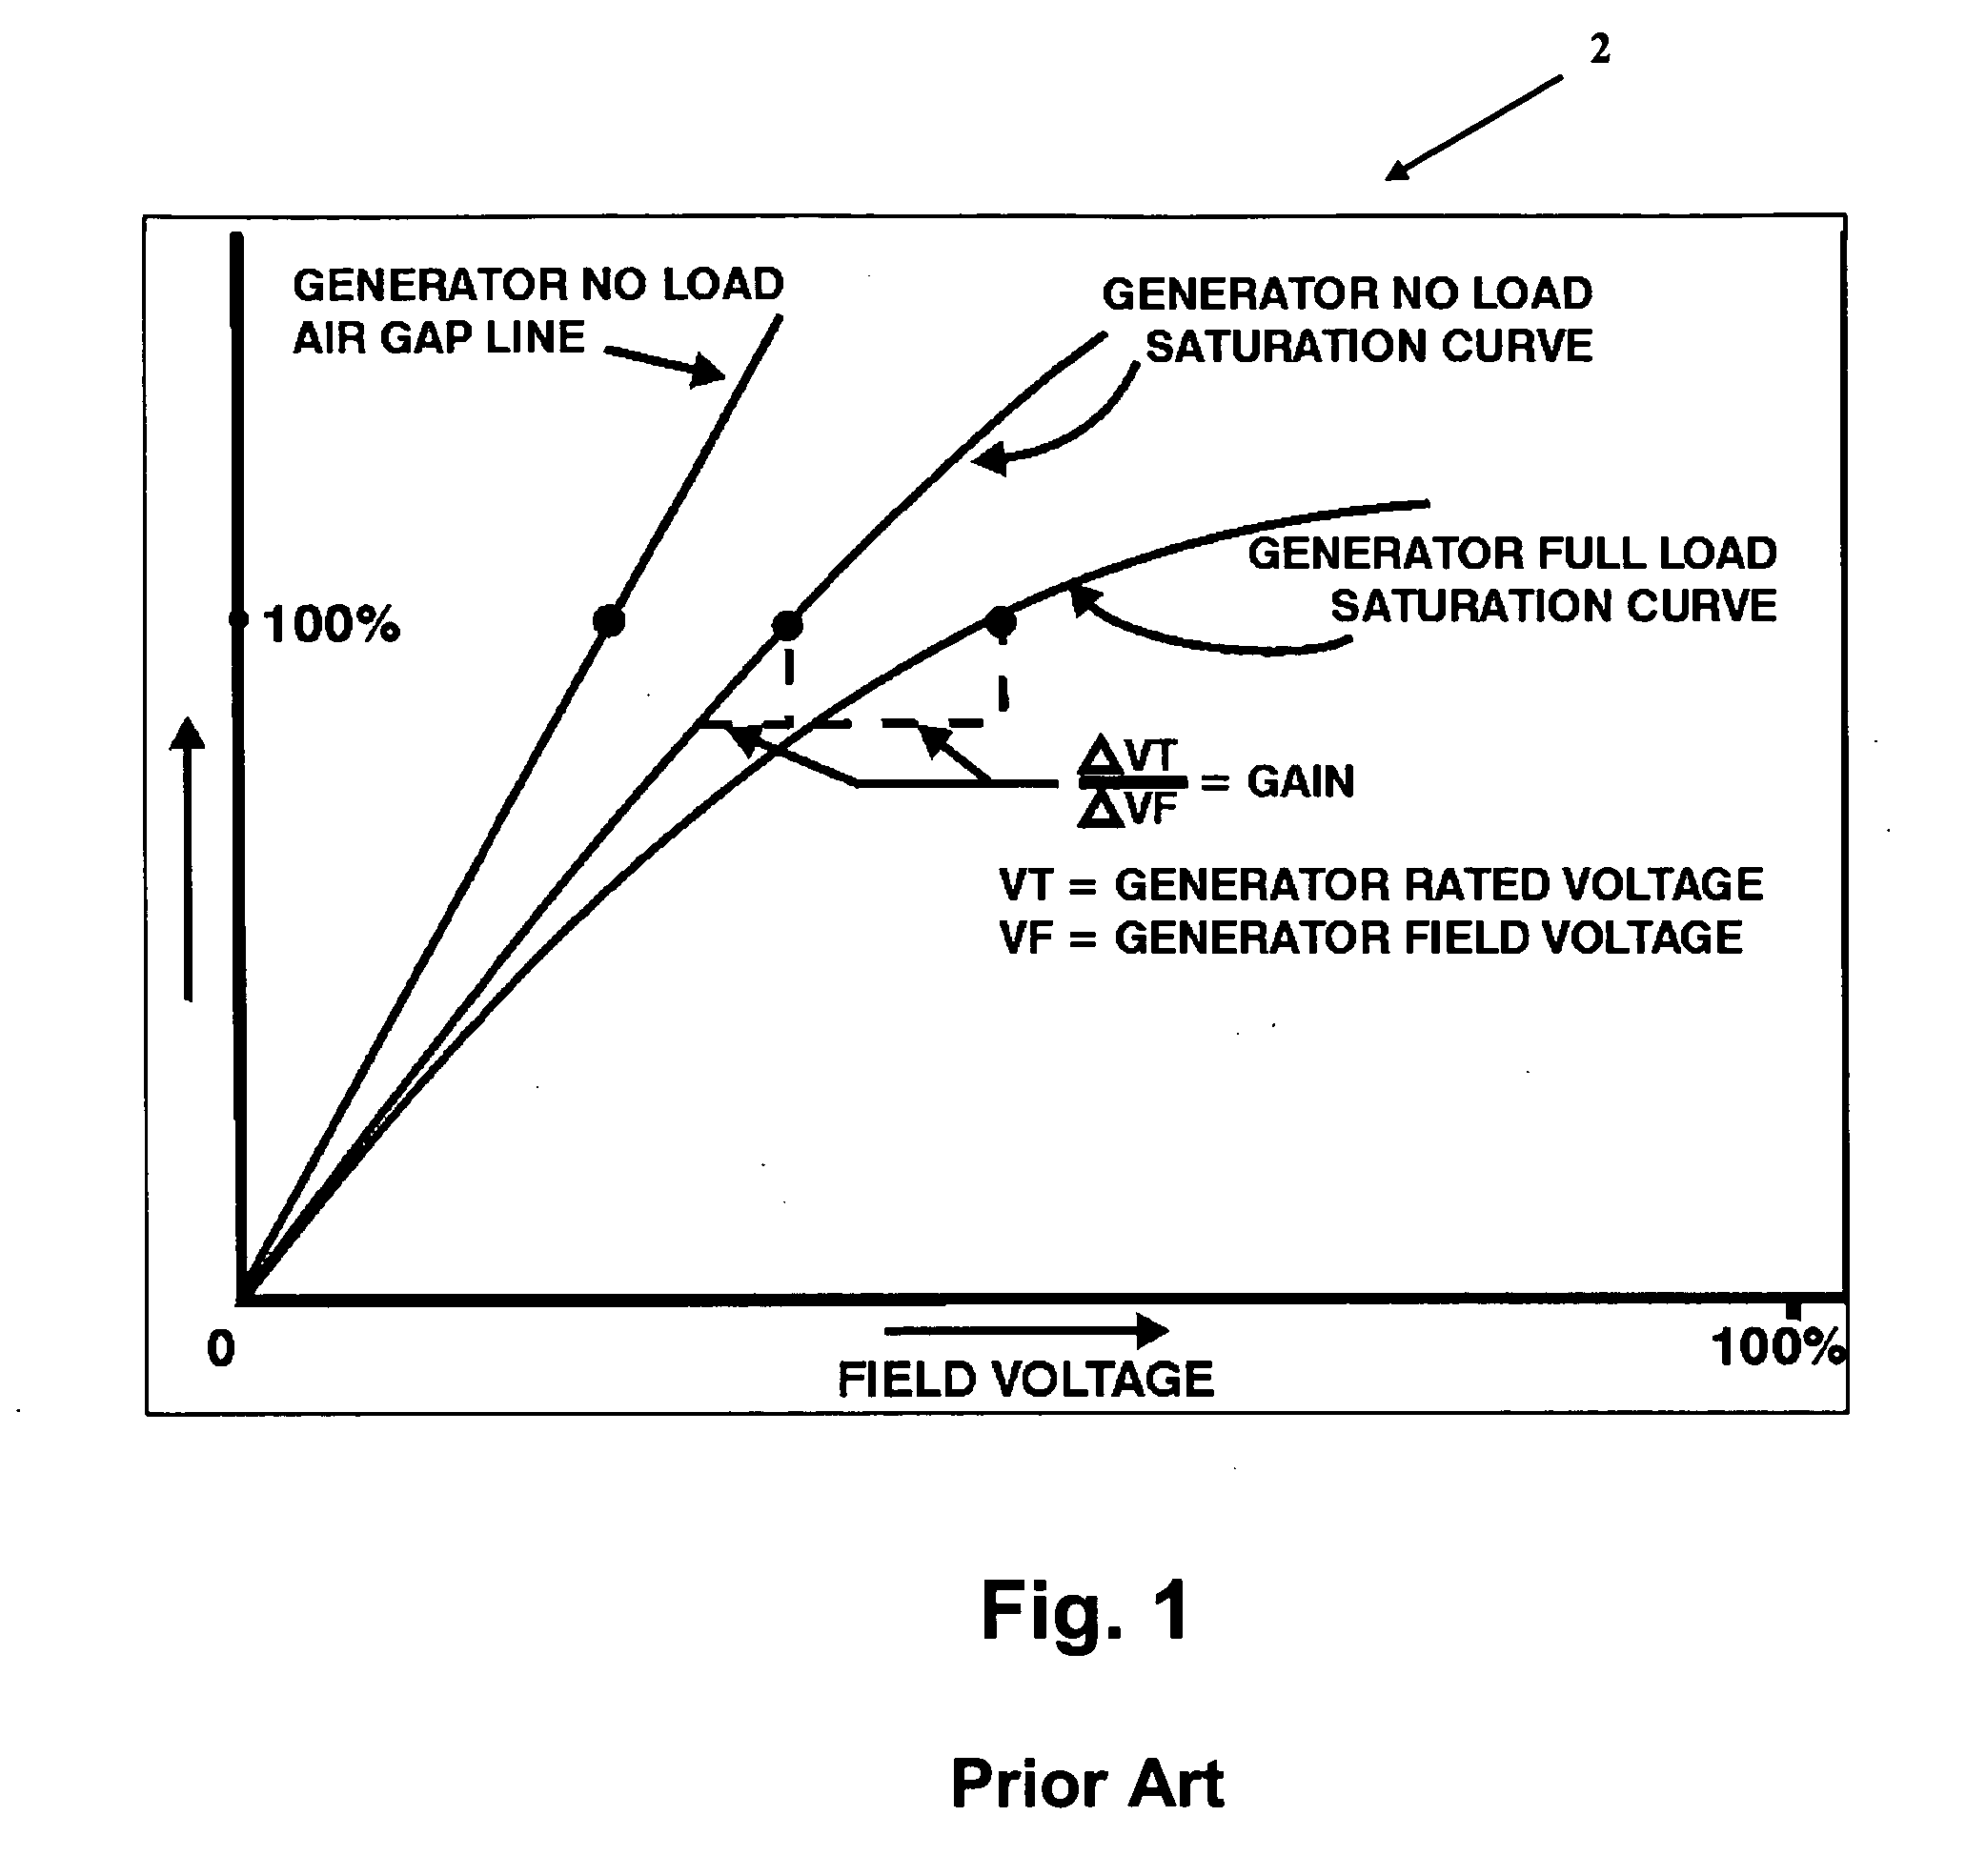 Digital Excitation Control System Utilizing Swarm Intelligence and An Associated Method of Use